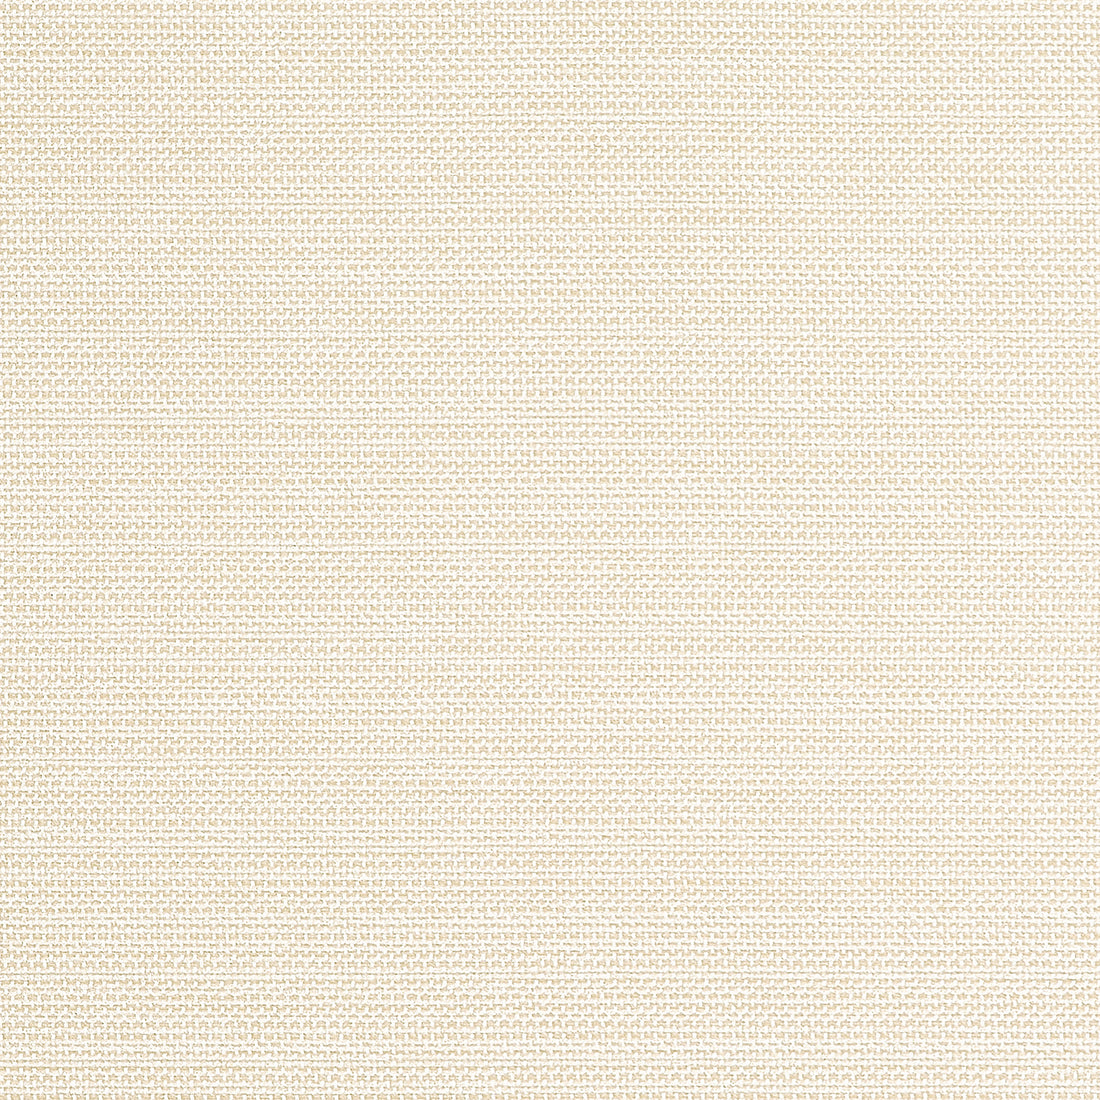 Cameron fabric in sand color - pattern number W81645 - by Thibaut in the Locale collection